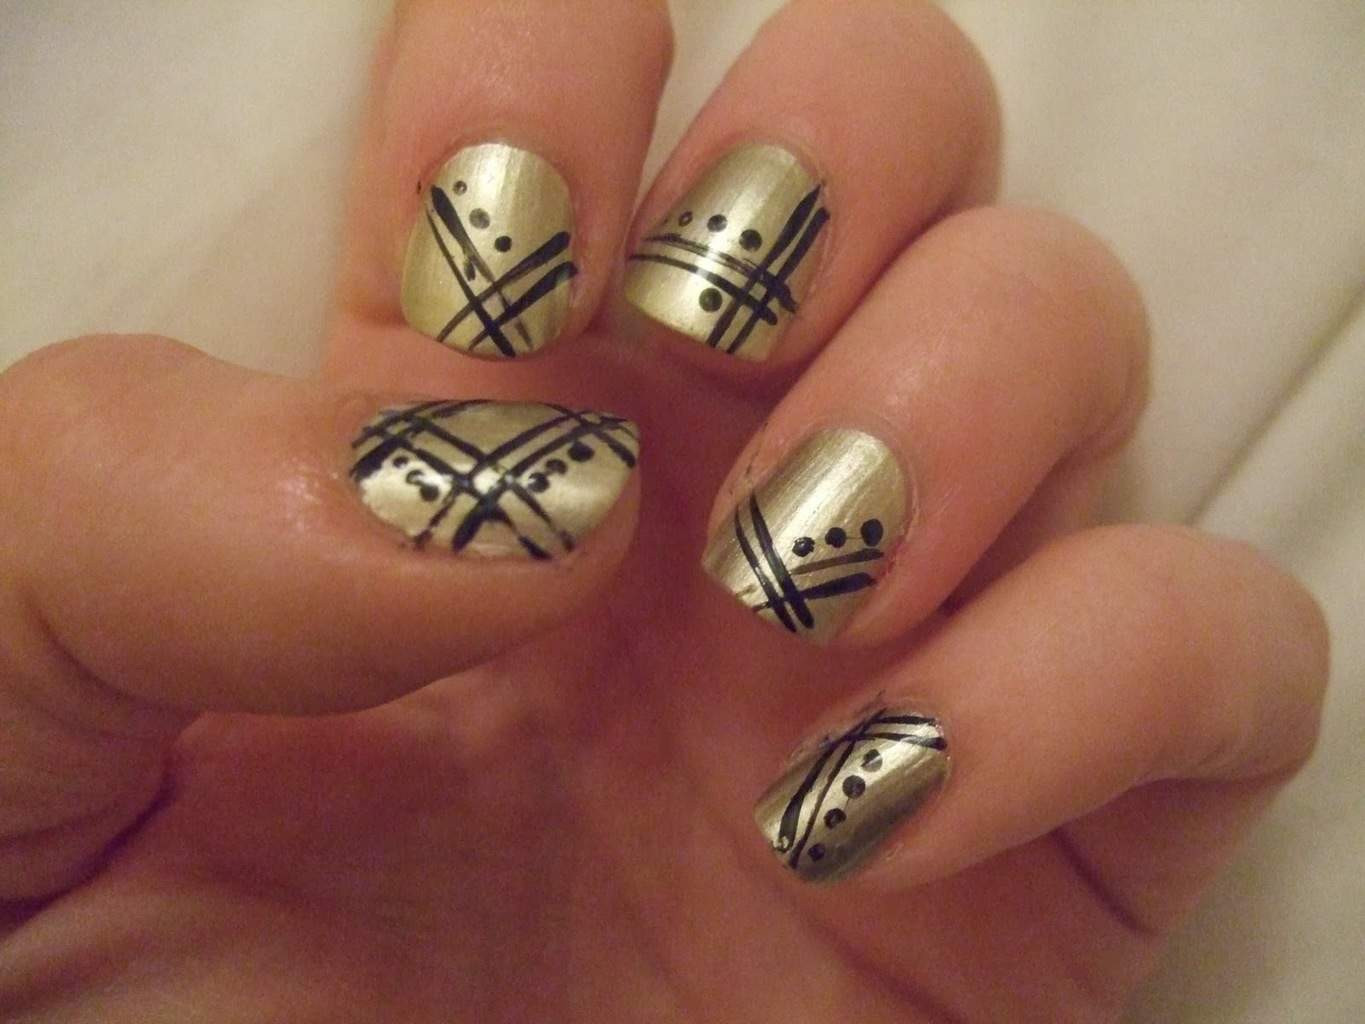 Golden Nail Art Designs
 50 Cute & Beautiful Nail Art Designs To Try Right Now